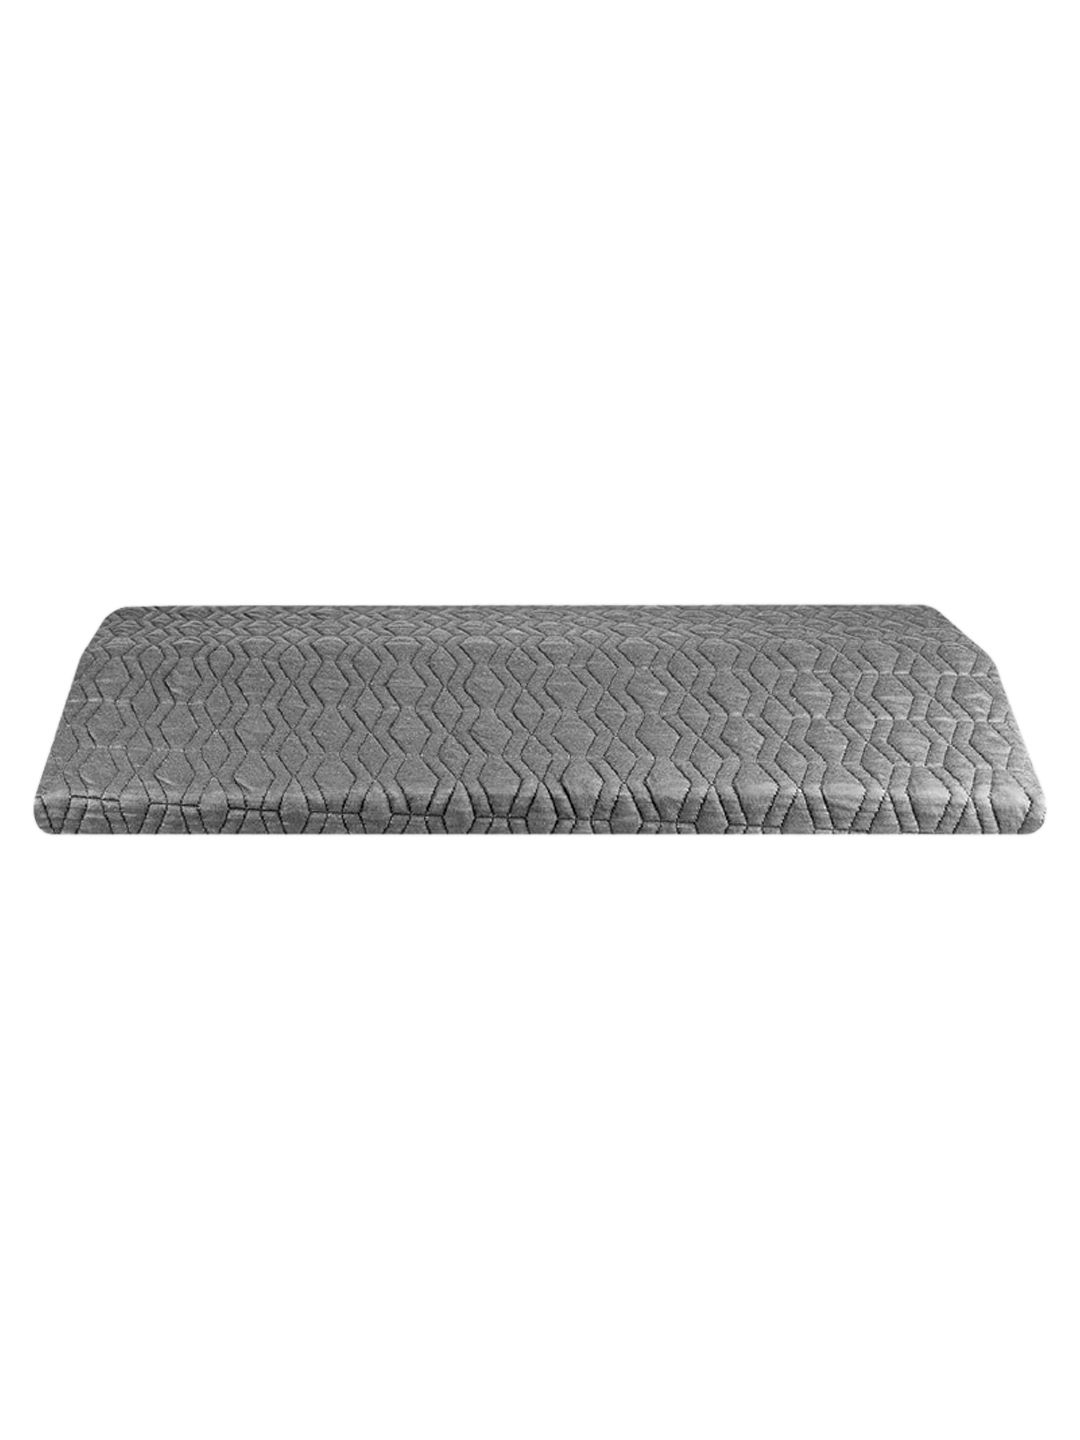 The White Willow Grey Memory Foam Lumbar Support Spine Pillow Price in India